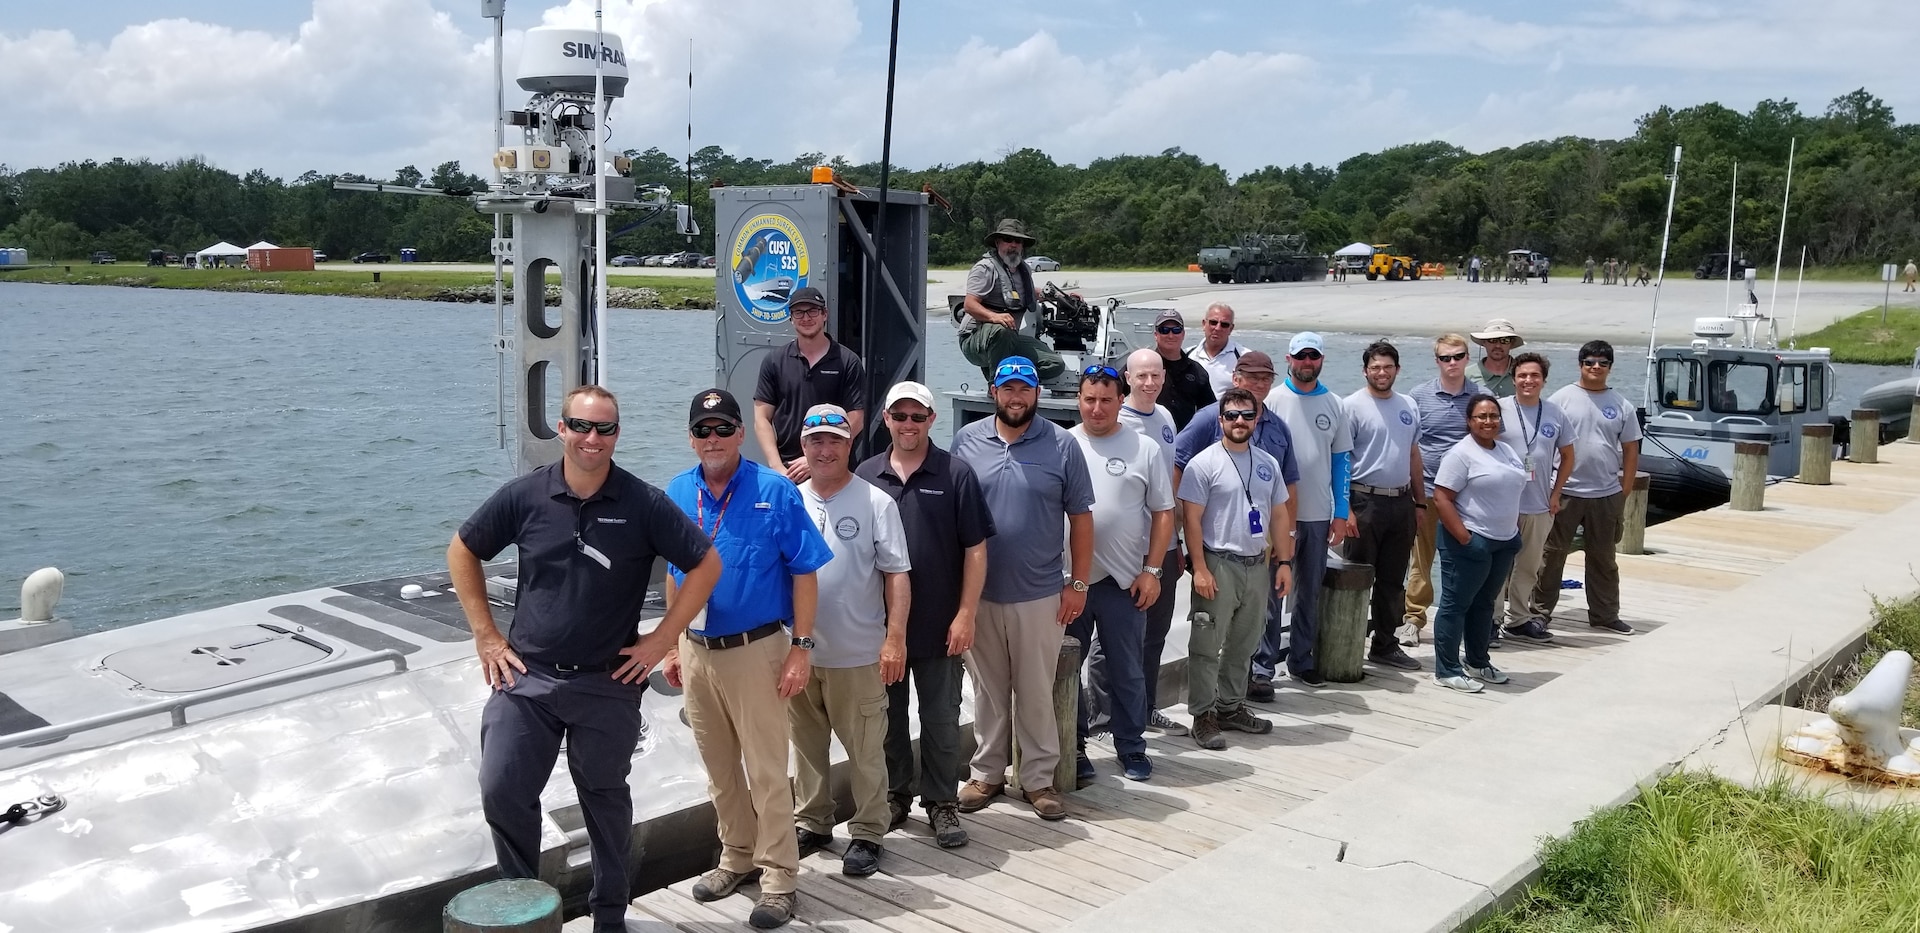 IMAGE: CAMP LEJEUNE, N.C. (July 19, 2019) — The Navy-industry Cooperative Research and Development Agreement (CRADA) team that developed the Expeditionary Warfare Unmanned Surface Vessel (USV) is pictured at the 2019 Advanced Naval Technology Exercise (ANTX). The team – comprised of Naval Surface Warfare Center Dahlgren Division (NSWCDD) and Textron Systems scientists and engineers – demonstrated the Expeditionary Warfare USV’s ability to control inshore and littoral areas while identifying and engaging remote targets. NSWCDD unmanned system experts worked with their industry partner under the CRADA to integrate expeditionary warfare payloads they developed and integrated onto Textron’s Common Unmanned Surface Vehicle.  (U.S. Navy photo/Released)